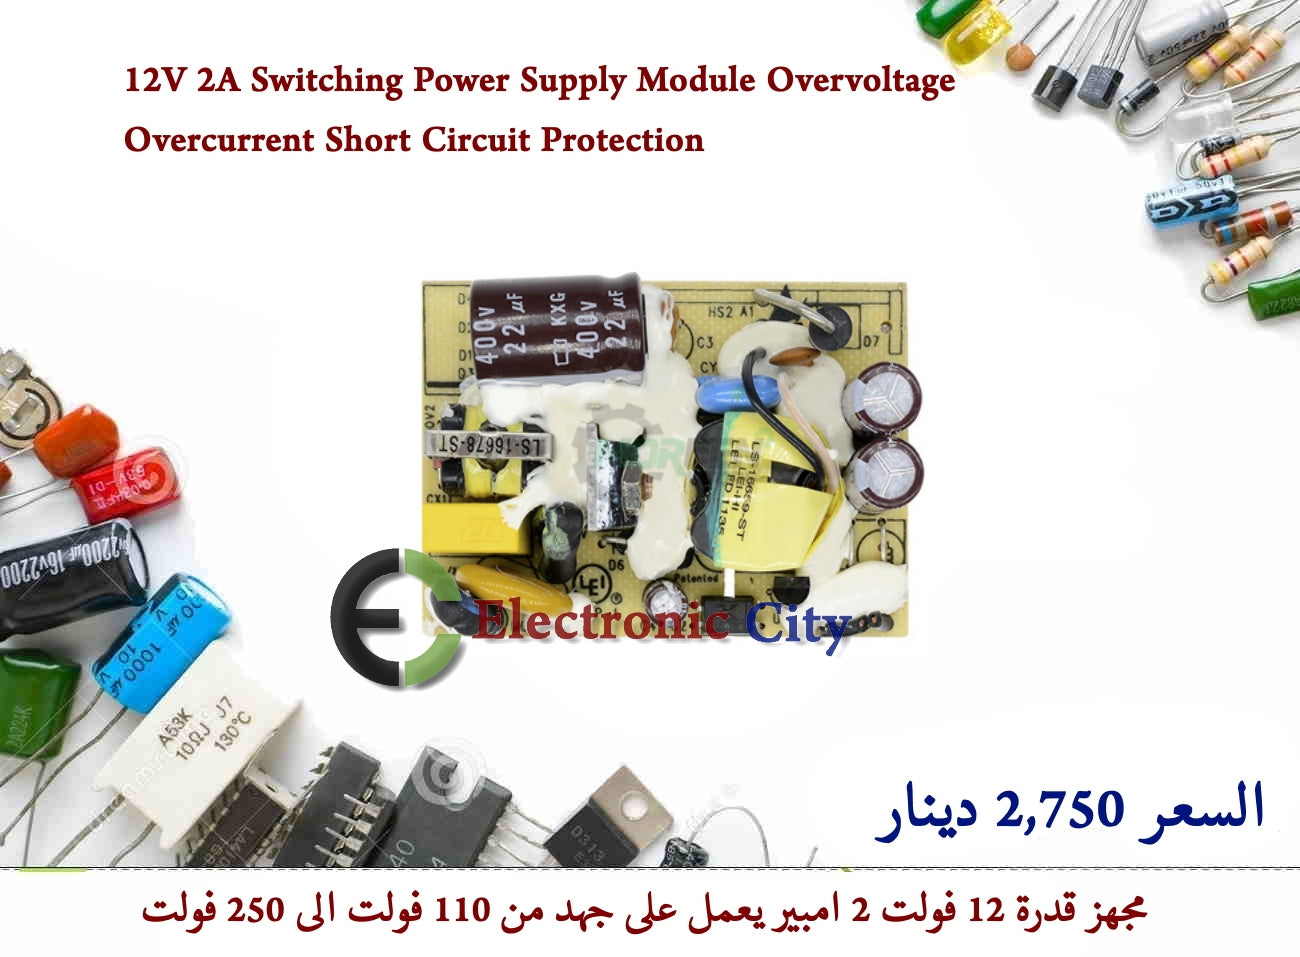 12V 2A Switching Power Supply Module Overvoltage Overcurrent Short Circuit Protection